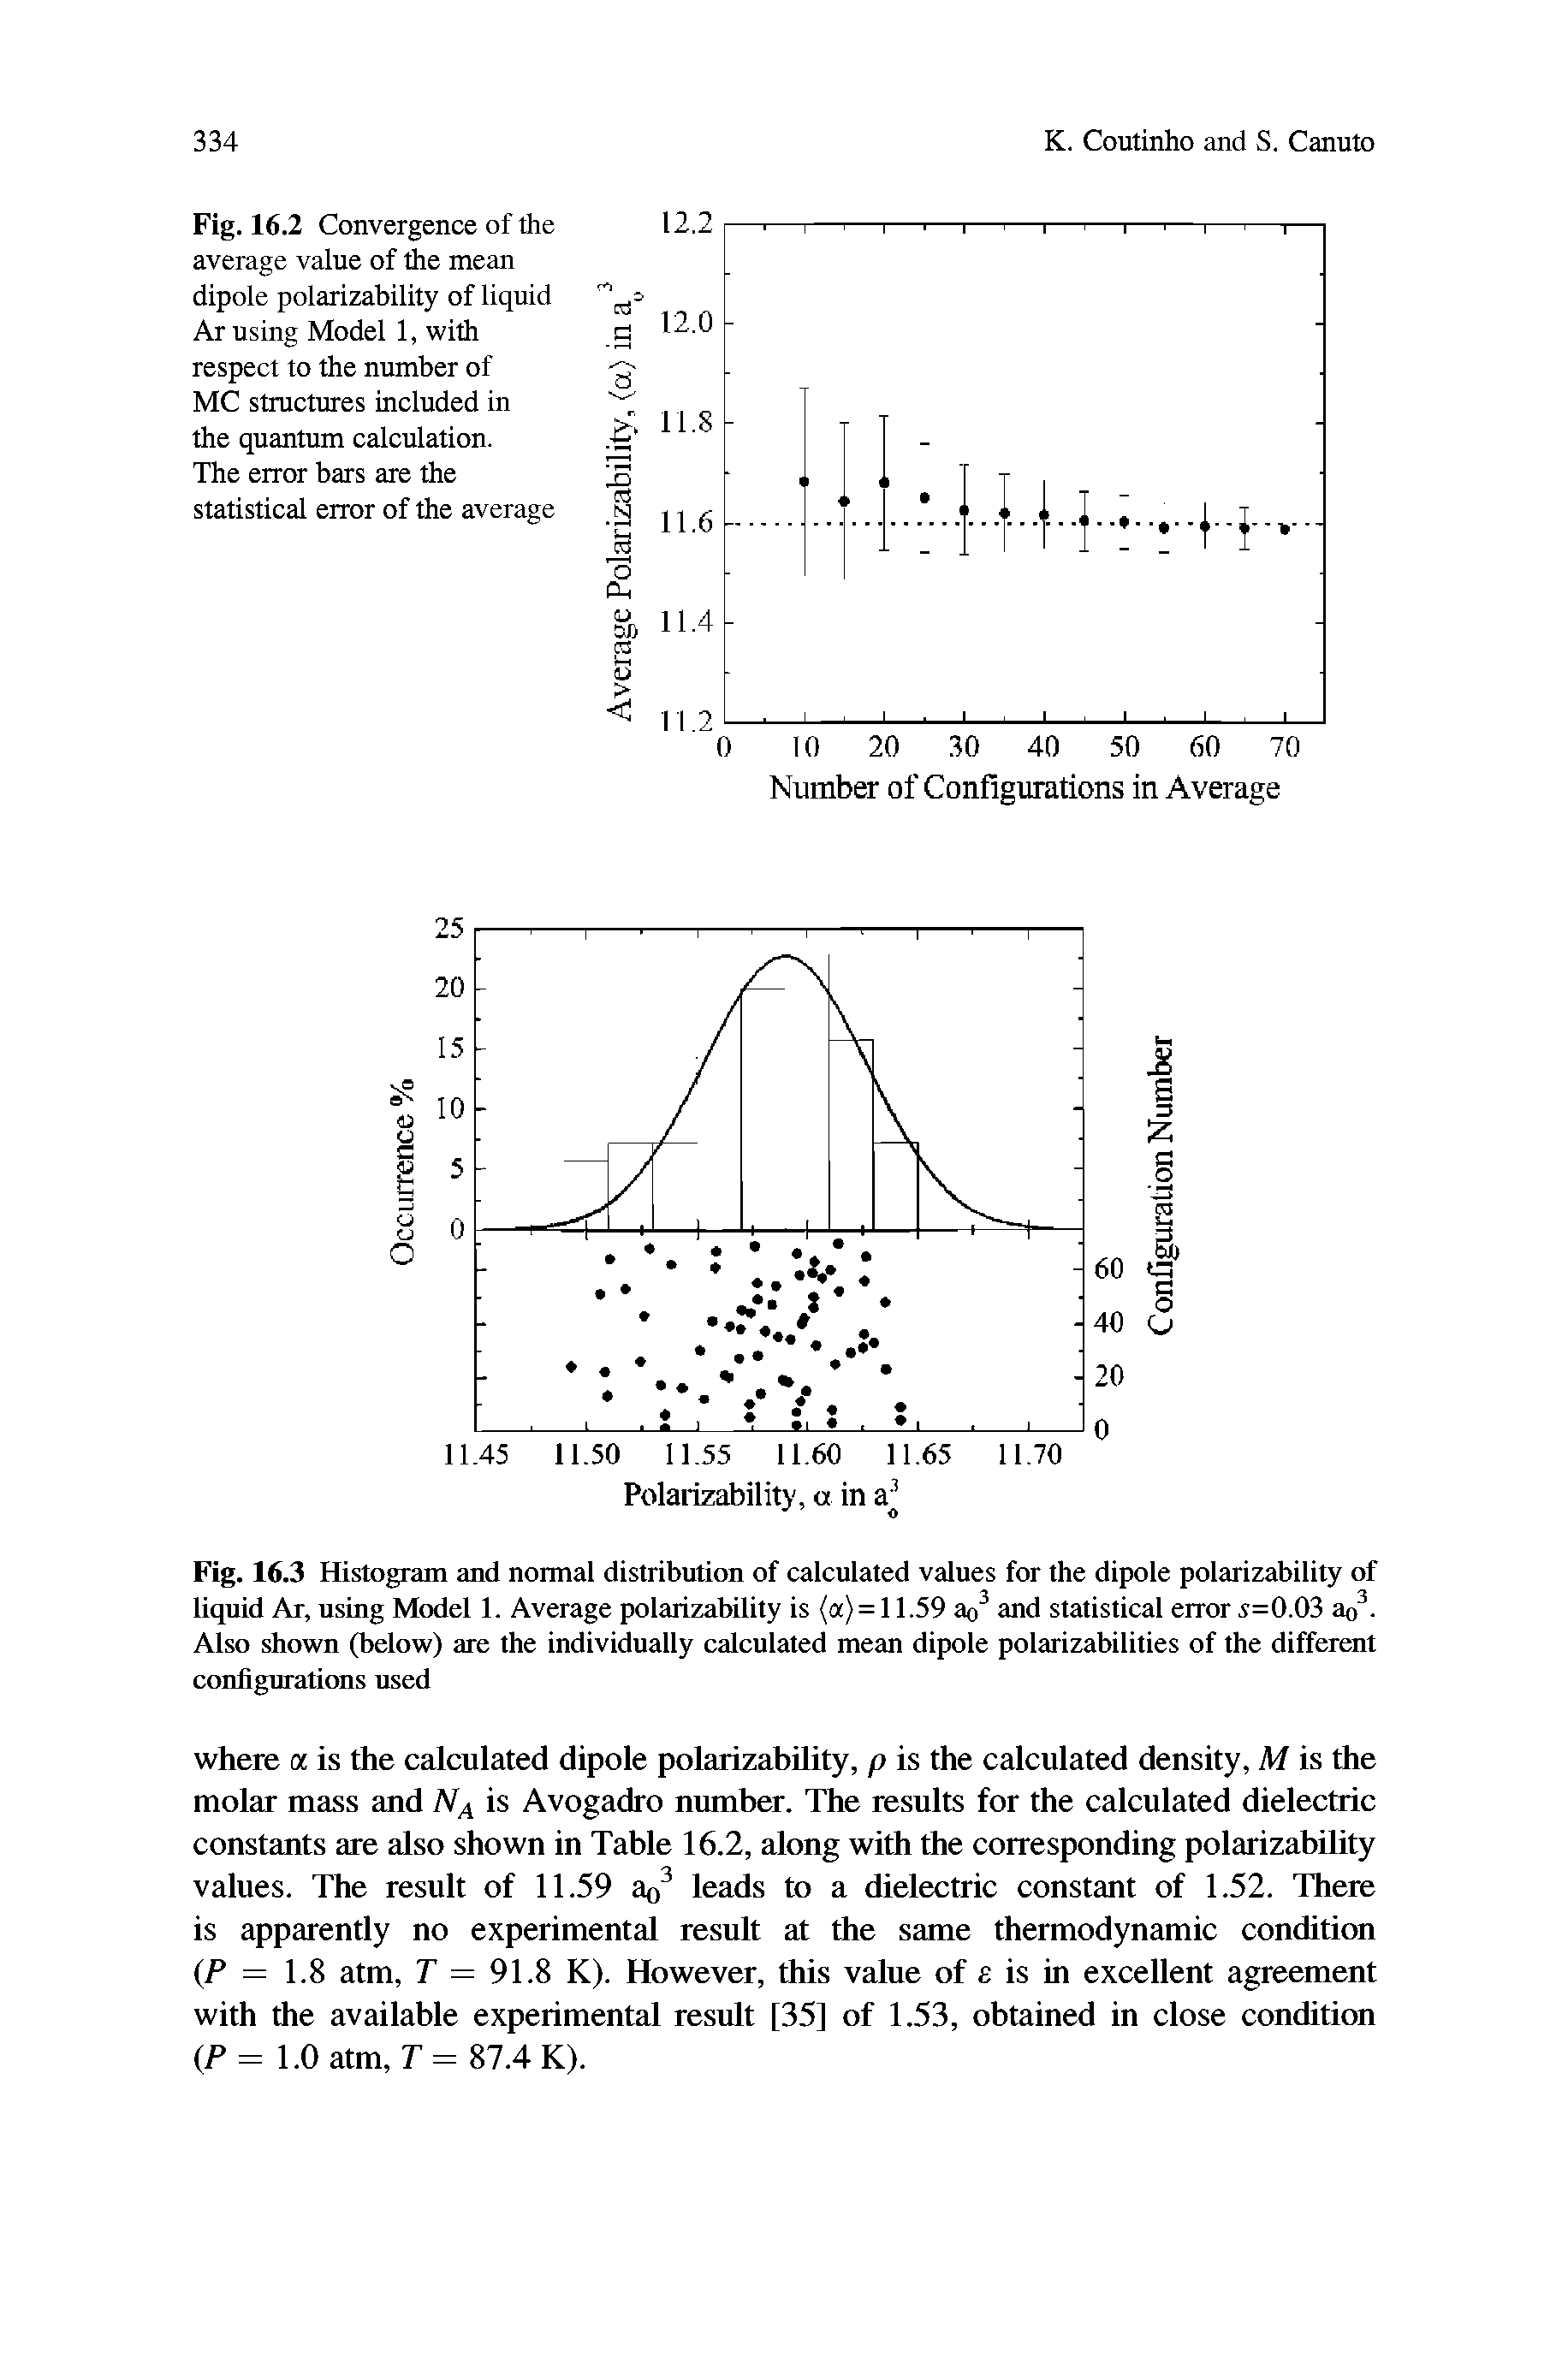 Fig. 16.2 Convergence of the average value of the mean dipole polarizability of liquid Ar using Model 1, with respect to the number of MC structures included in the quantum calculation.